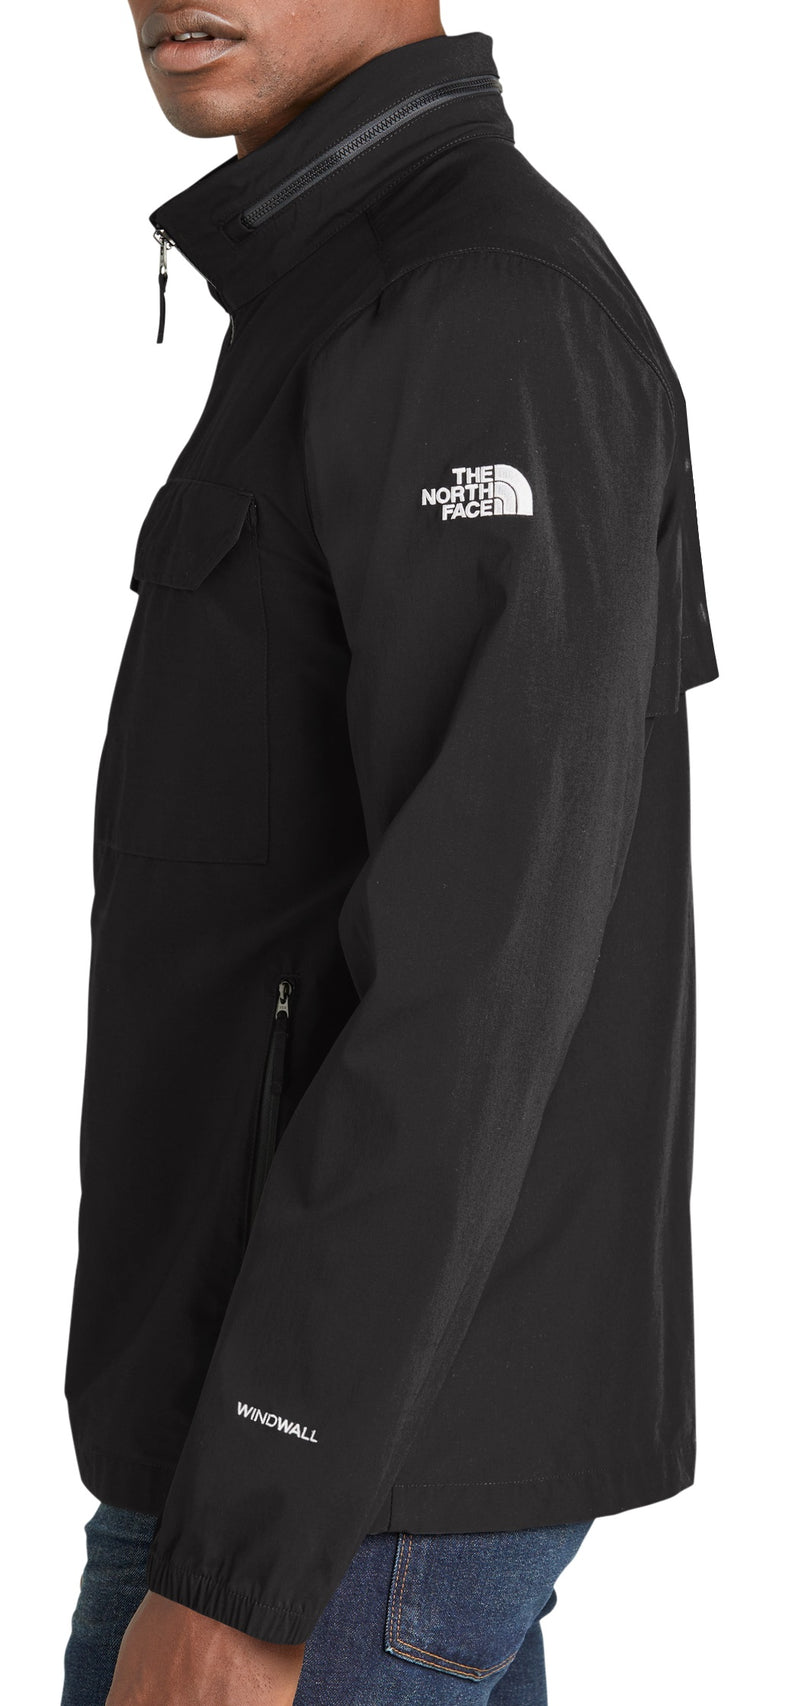 The North Face [NF0A5ISG] Packable Travel Jacket. Live Chat For Bulk Discounts.